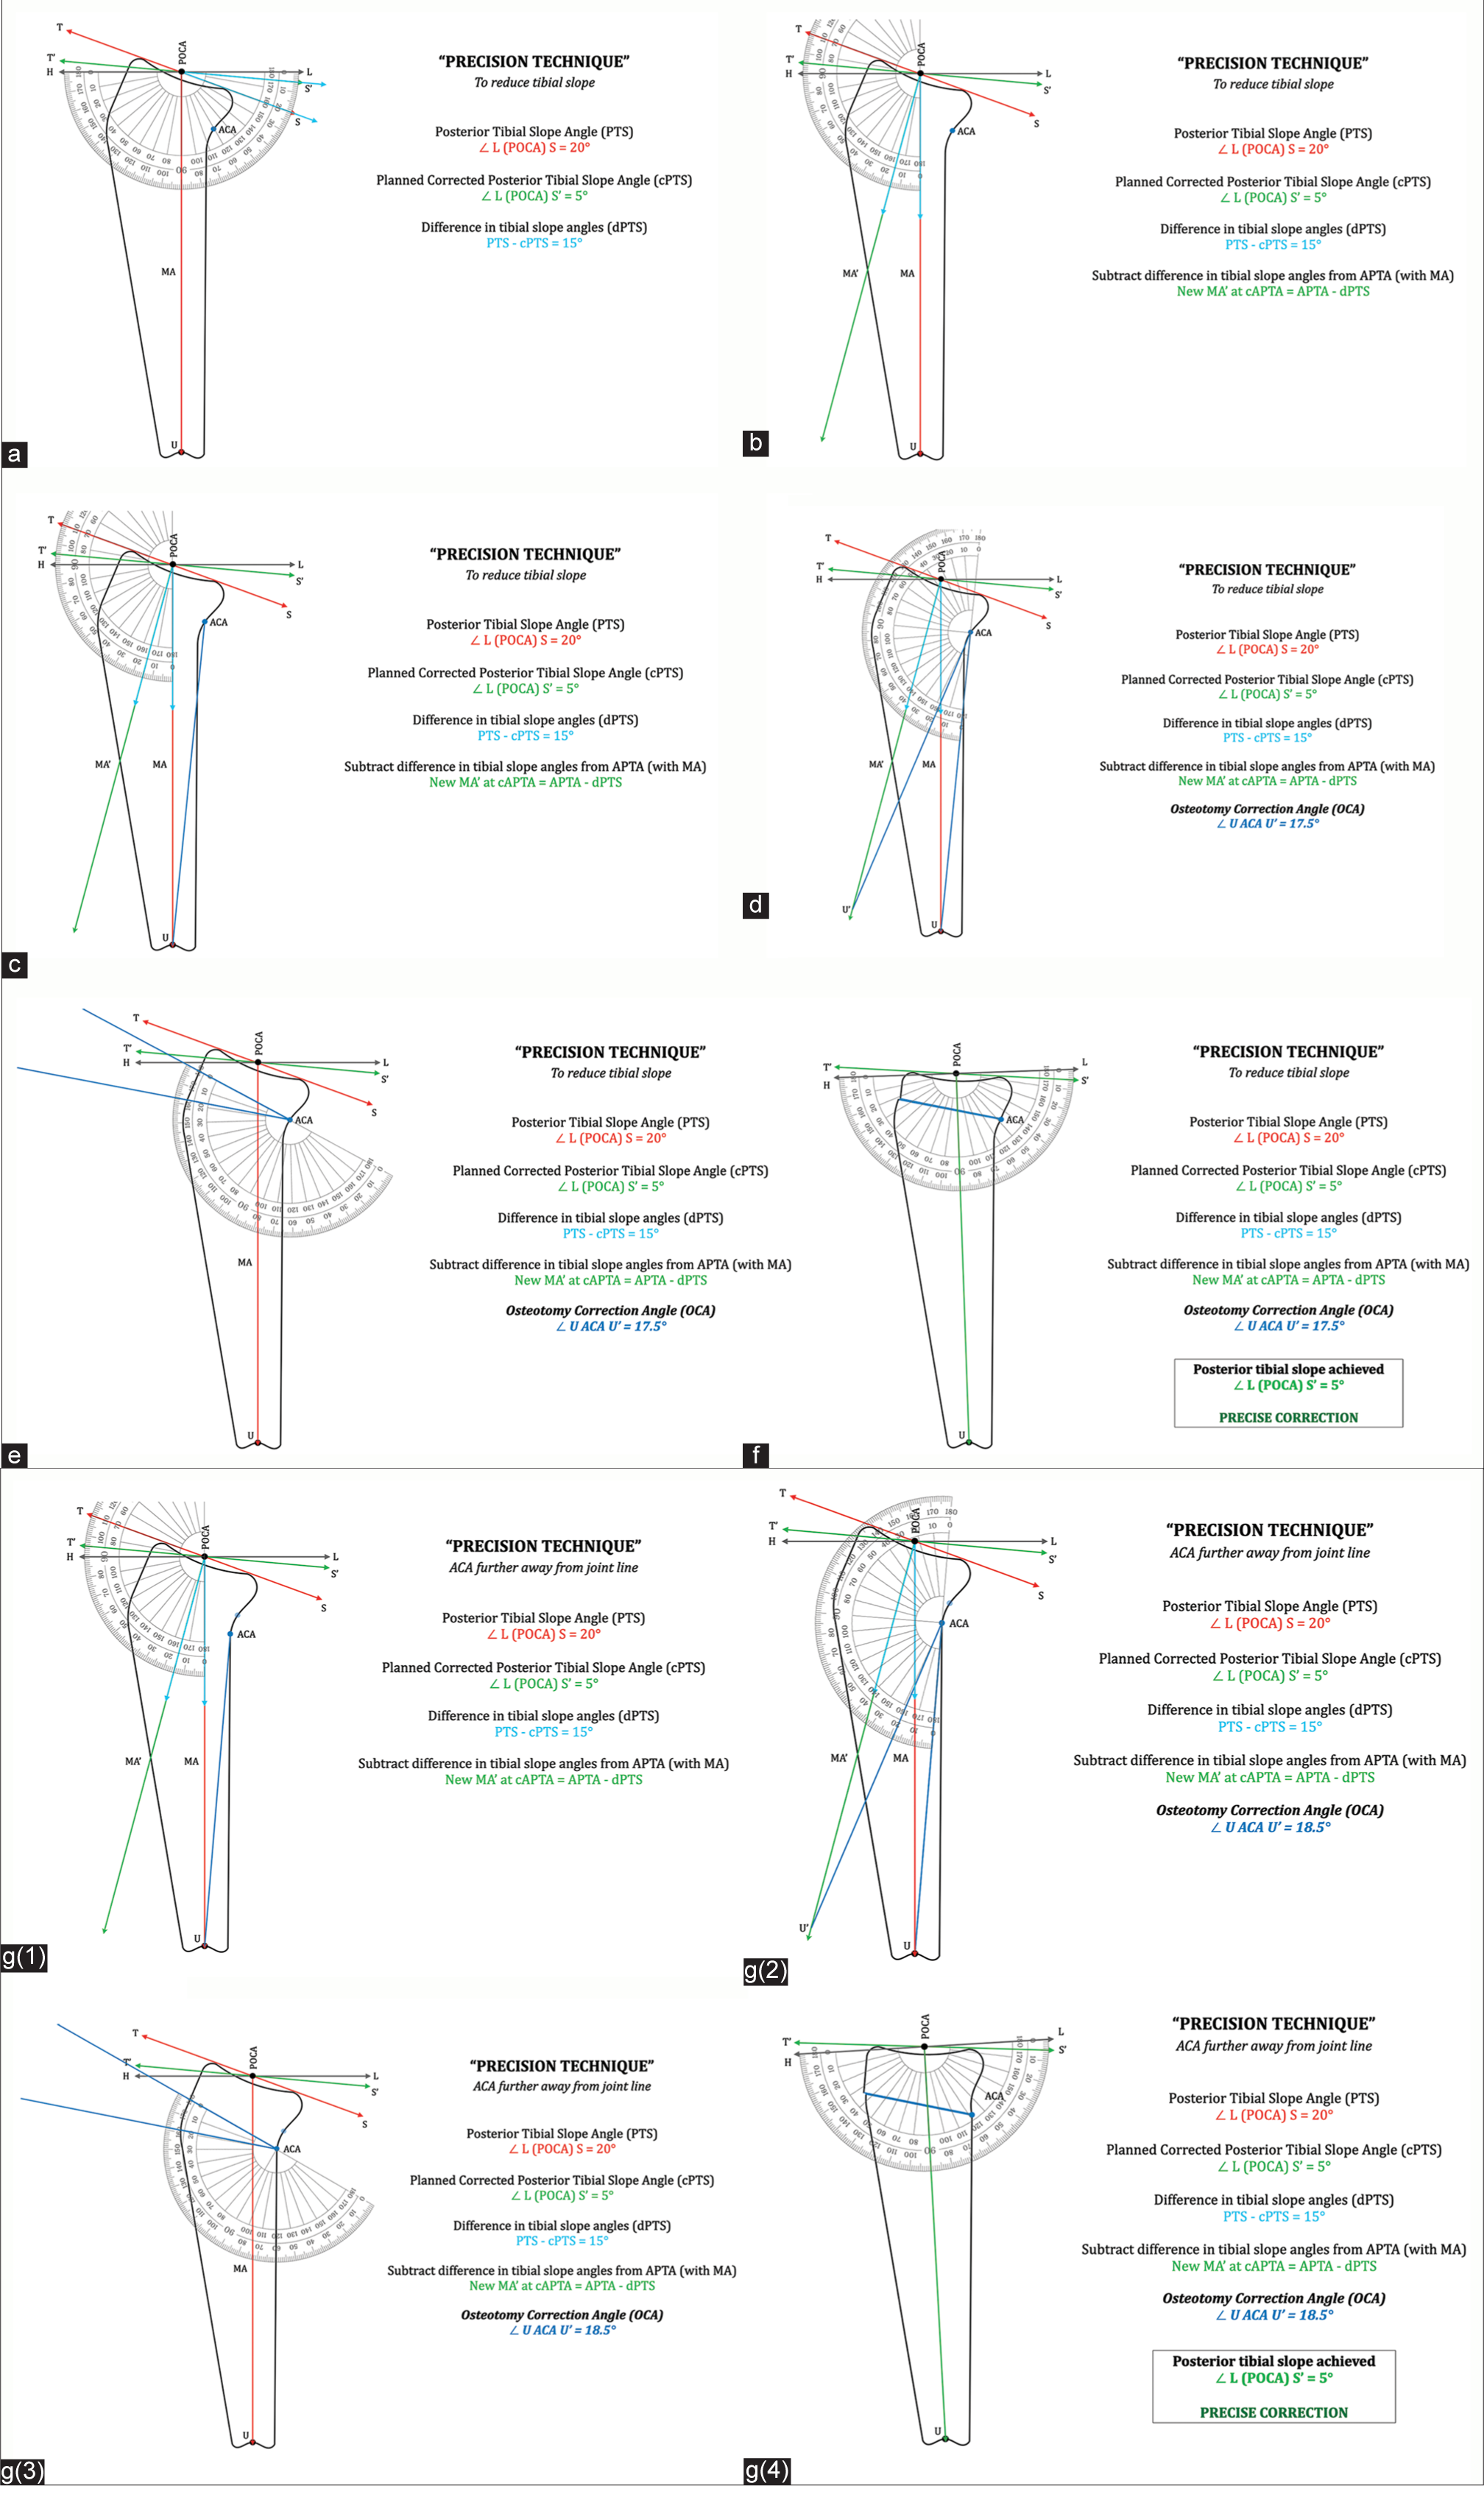 “Precision technique” of calculating posterior tibial slope correction: Tibial slope line/segment – TS, Planned postoperative tibial slope – T’S’, Point of calculation of angle (midpoint of tibial plateau) – POCA, Midpoint of tibial plafond at ankle – U, Pre-operative mechanical axis ( POCA U¯ ) – MA, Planned post-operative mechanical axis – MA’ , Pre-operative posterior tibial slope angle – PTS, Postoperative planned (corrected) posterior tibial slope angle – cPTS, Anterior proximal tibial angle ∠ T (POCA) U – APTA, Planned corrected anterior proximal tibial angle – cAPTA, Axis of correction of angulation – ACA, Osteotomy correction angle – OCA. (a) Difference in posterior tibial slope angles (dPTS). dPTS = PTS – cPTS = ∡ S (POCA) S.’ (b) To reduce tibial slope angle: New mechanical axis MA’ with new anterior proximal tibial angle (cAPTA) is marked at POCA by subtracting dPTS from anterior proximal tibial angle (APTA). MA’ at ∡ cAPTA = APTA – dPTS. (c) Draw a line segment from ACA to U. (d) Extend an arc of radius ACA U¯ onto the new mechanical axis MA’ to intersect at point U’. This measure of angle ∡ U ACA U’ is the final precise OCA. (e) OCA is marked at the axis of correction of angulation (ACA) replicating the osteotomy wedge. (f) OCA wedge is closed. Posterior tibial slope angle is measured ∠ L (POCA) S. Posterior tibial slope achieved is precisely same as the planned corrected posterior slope (cPTS) of 5°. (g) ACA further away from joint line: g(1) Draw a line segment from ACA to U. g(2) Extend an arc of radius ACA U¯ onto the new mechanical axis MA’ to intersect at point U’. This measure of angle ∡ U ACA U’ is the final precise OCA. Note that the measure of OCA changes as the position of ACA changes. g(3) OCA is marked at axis of correction of angulation (ACA) replicating the osteotomy wedge. g(4) OCA wedge is closed. Posterior tibial slope angle is measured ∠ L (POCA) S. Posterior tibial slope achieved is precisely same as the planned corrected posterior tibial slope (cPTS) of 5°.